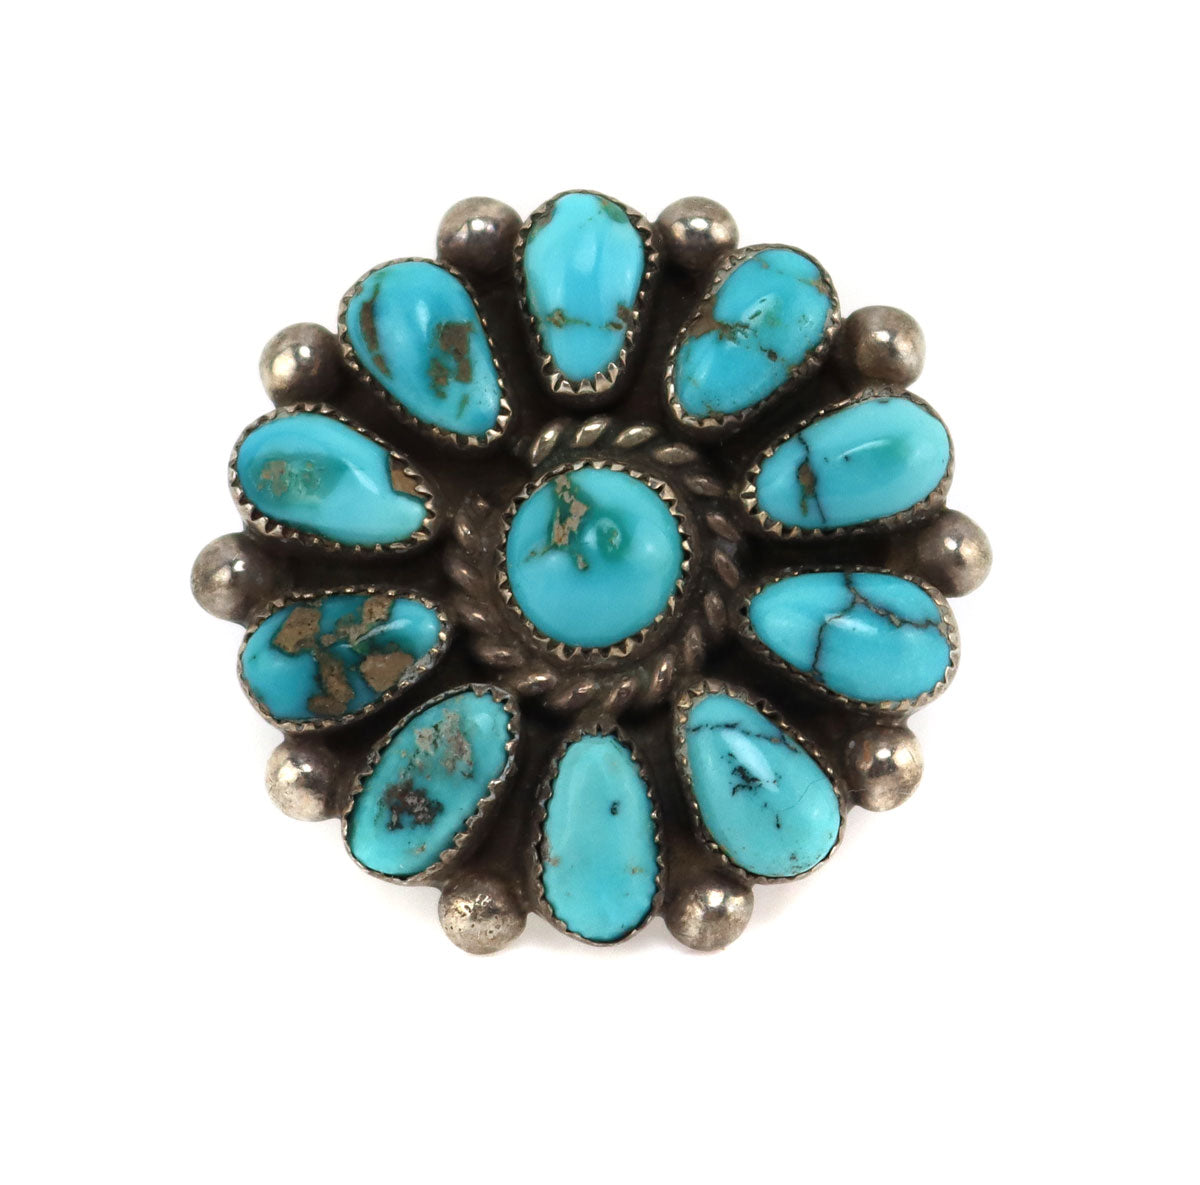 Zuni - Turquoise Cluster and Silver Ring c. 1950s, size 6.5